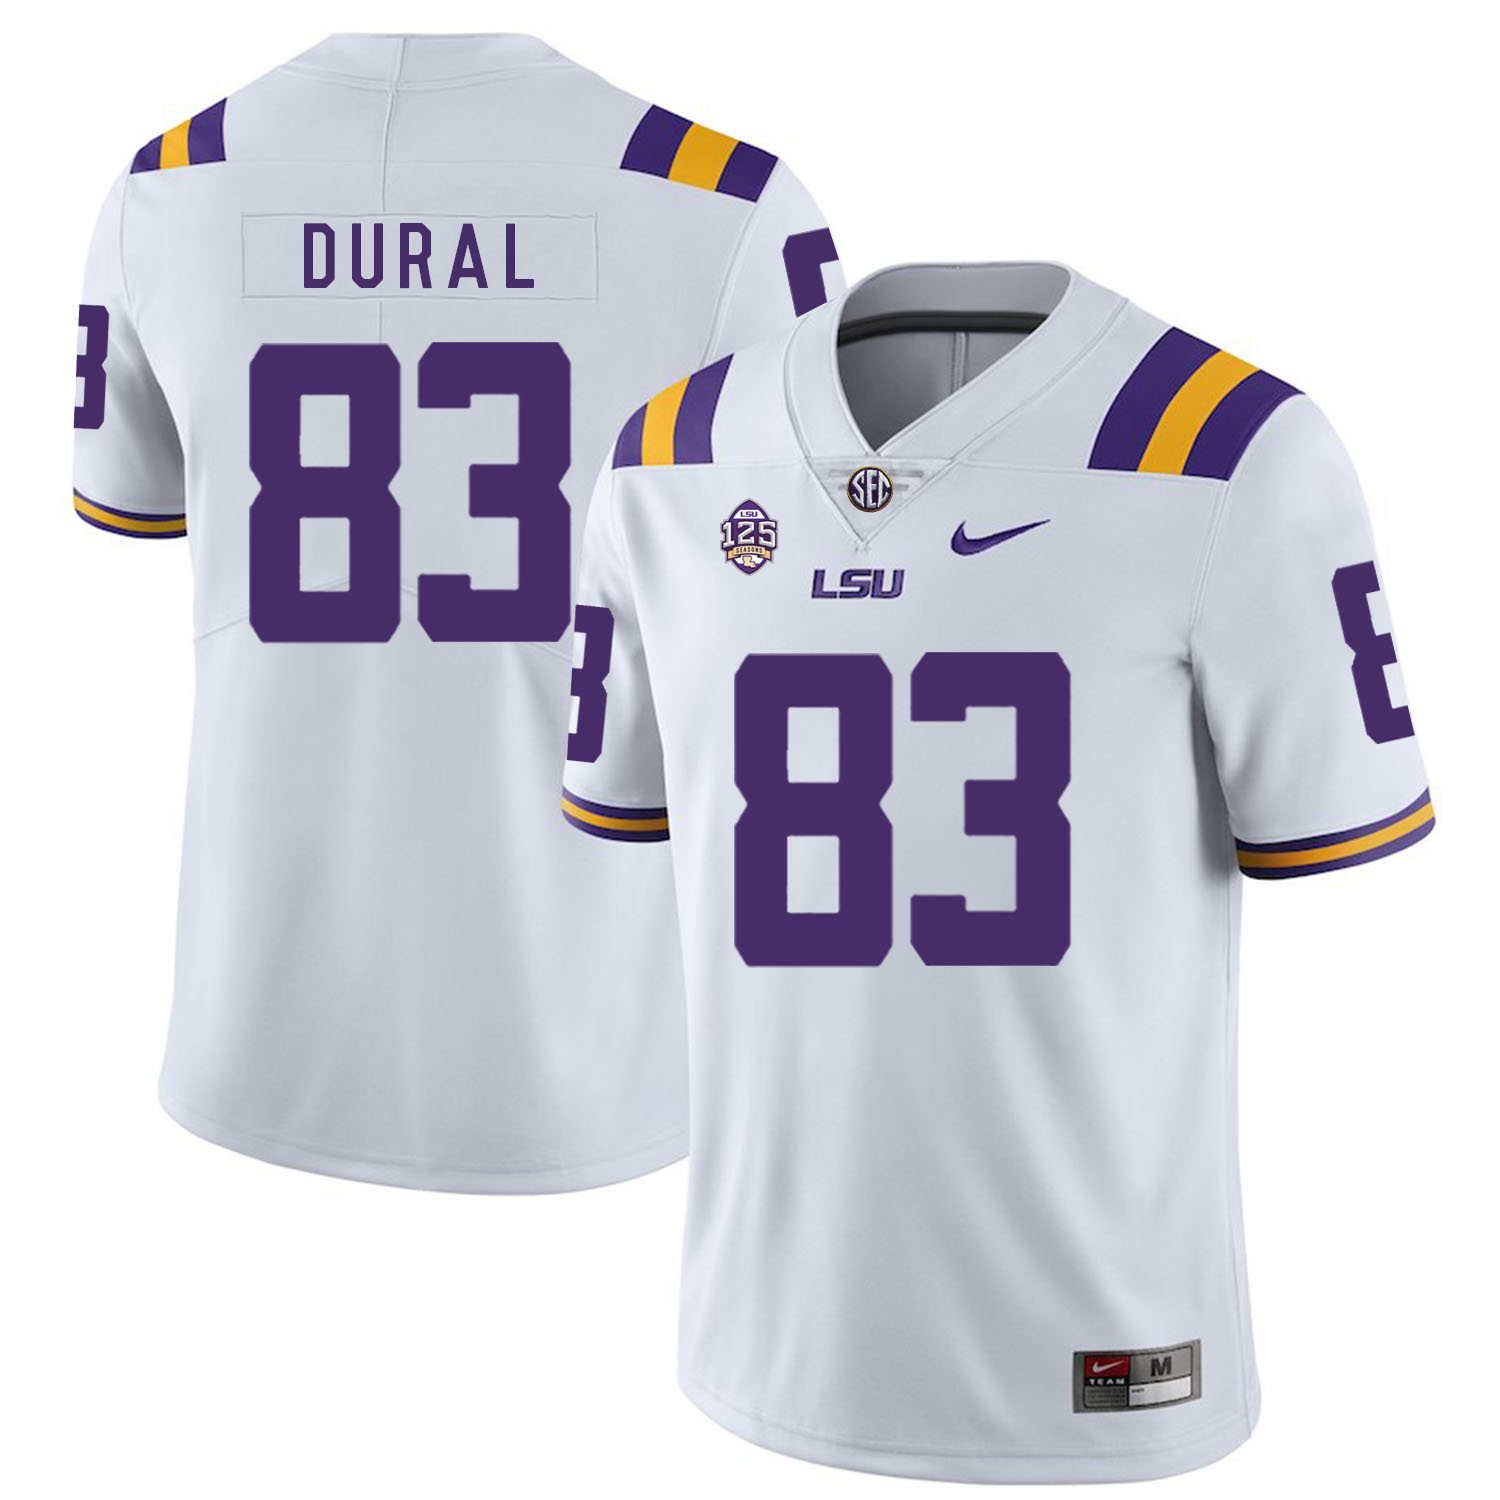 LSU Tigers 83 Travin Dural White Nike College Football Jersey